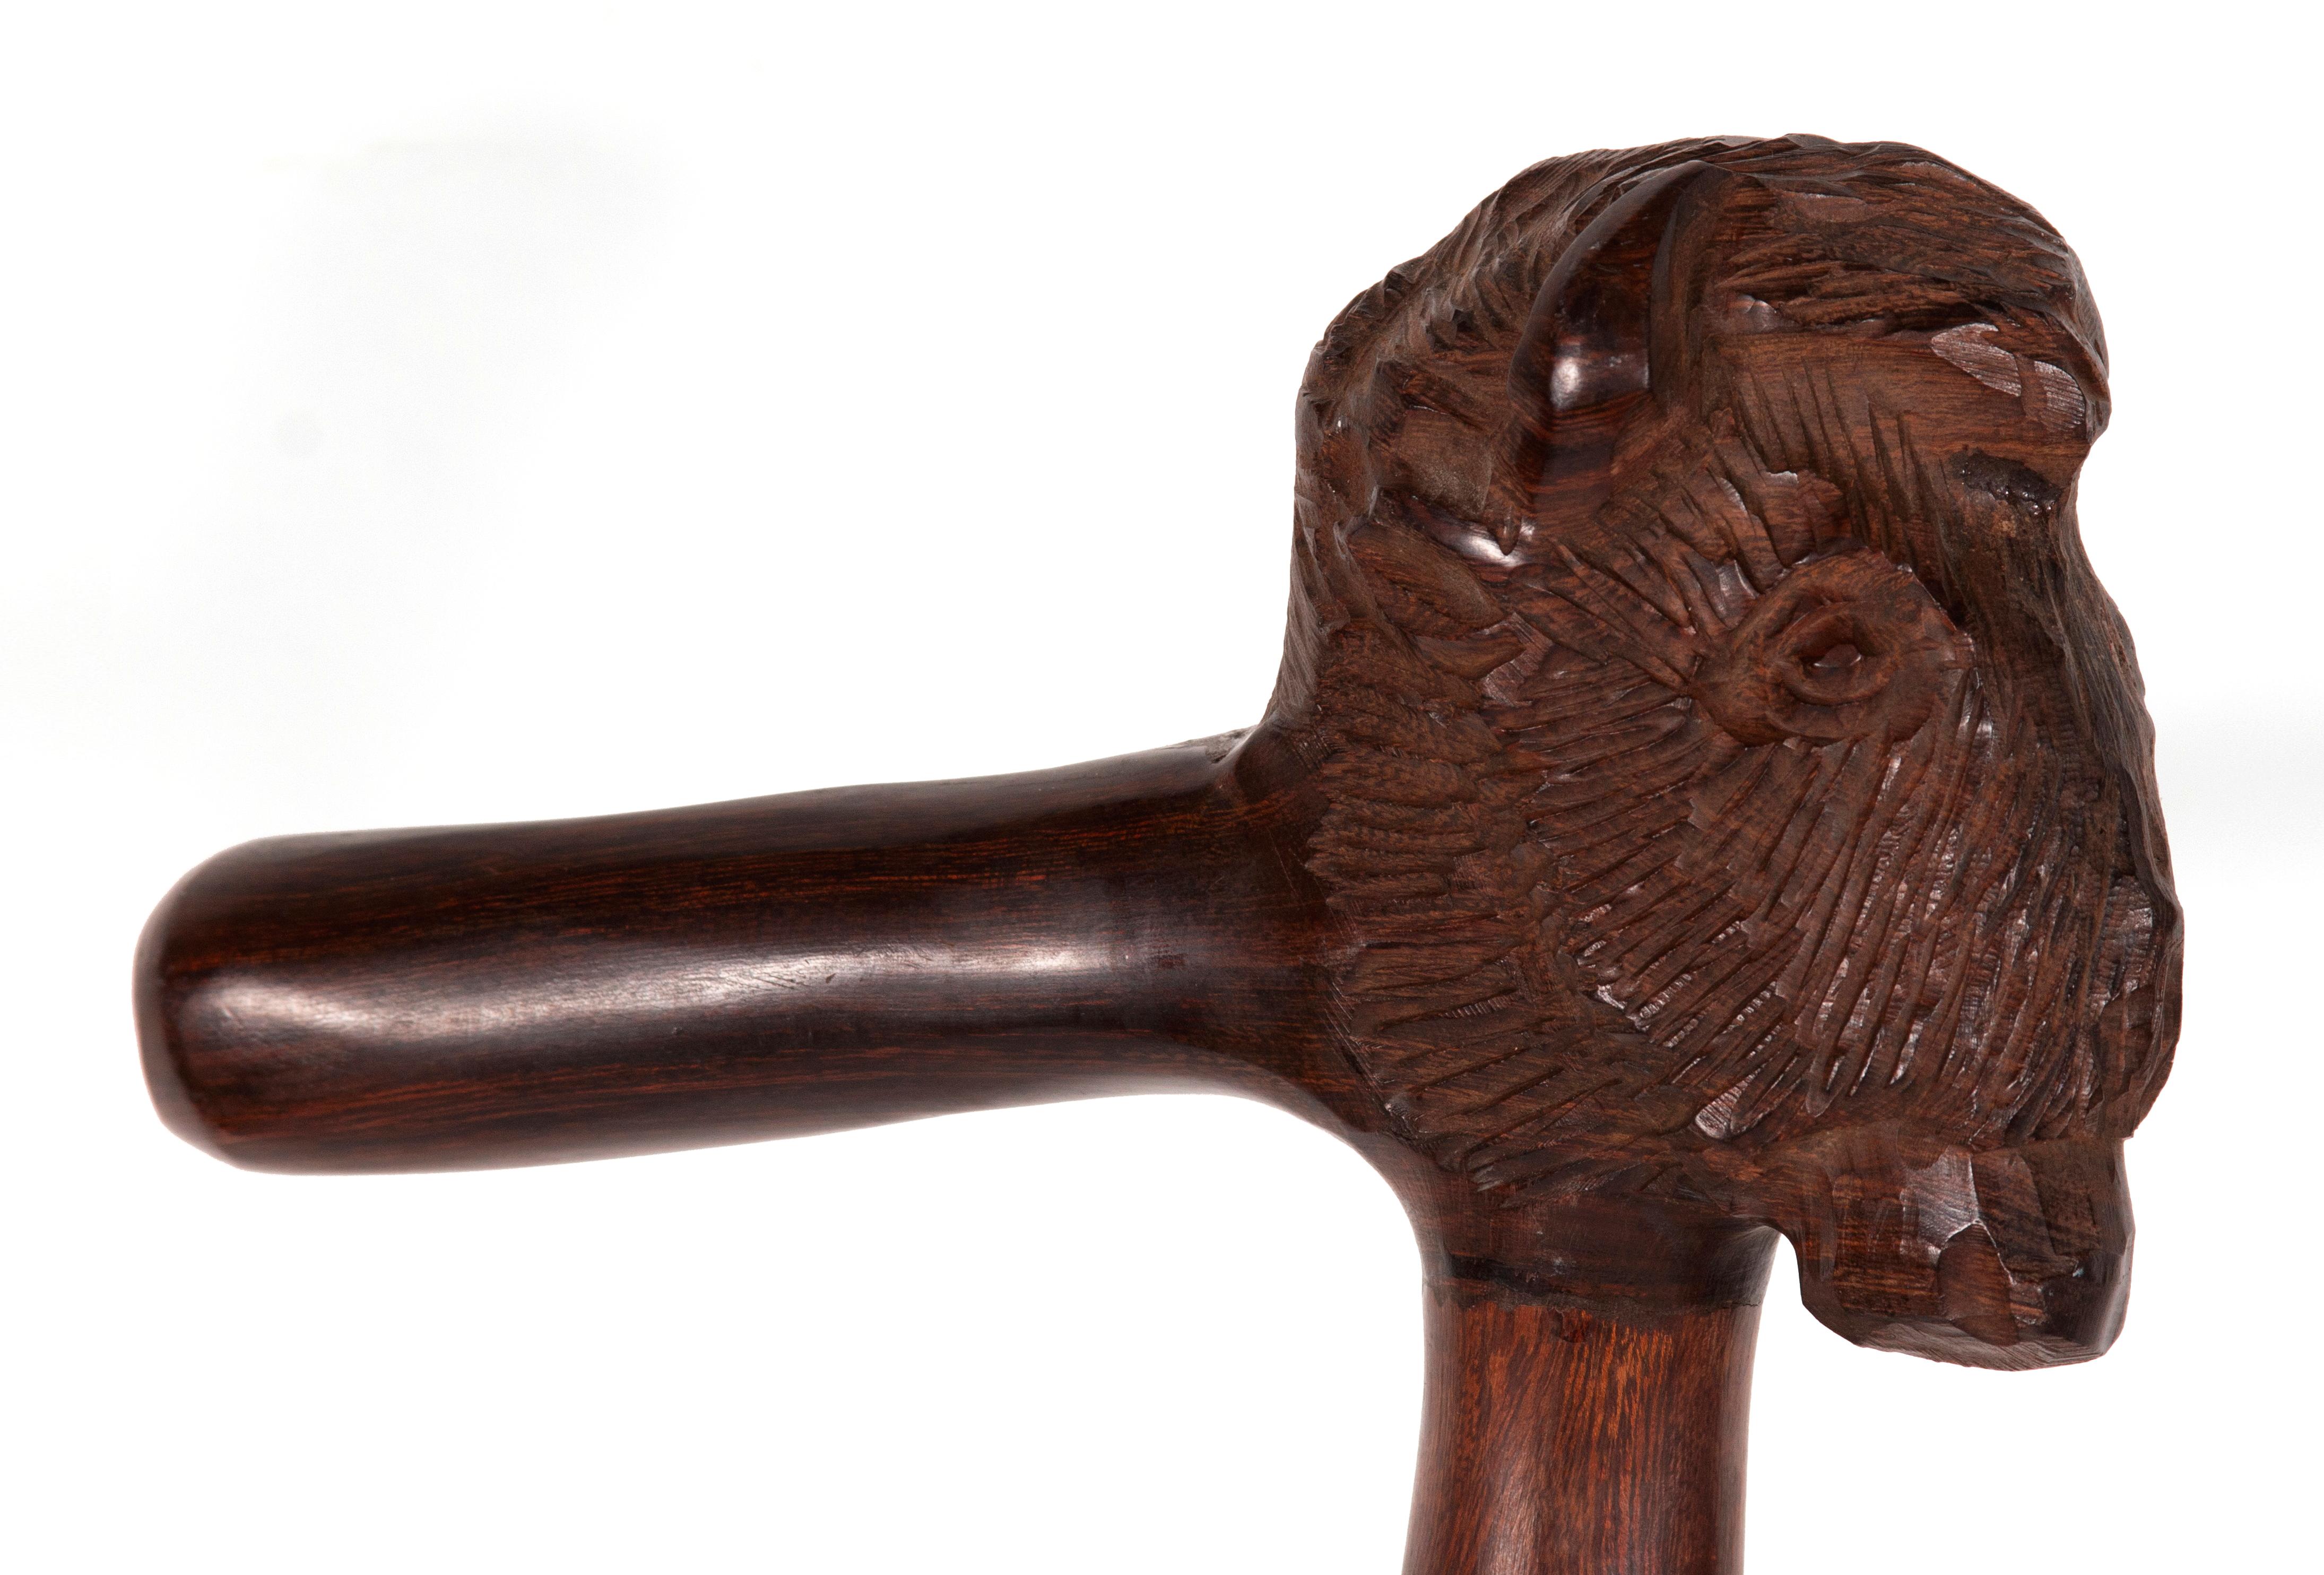 Carved wooden cane, made of rosewood, with a substantially sized head of an American Bison at the knuckle. The great artistic interpretation has wonderful folk qualities. The handle and shaft are expertly polished and the weight is very heavy. The